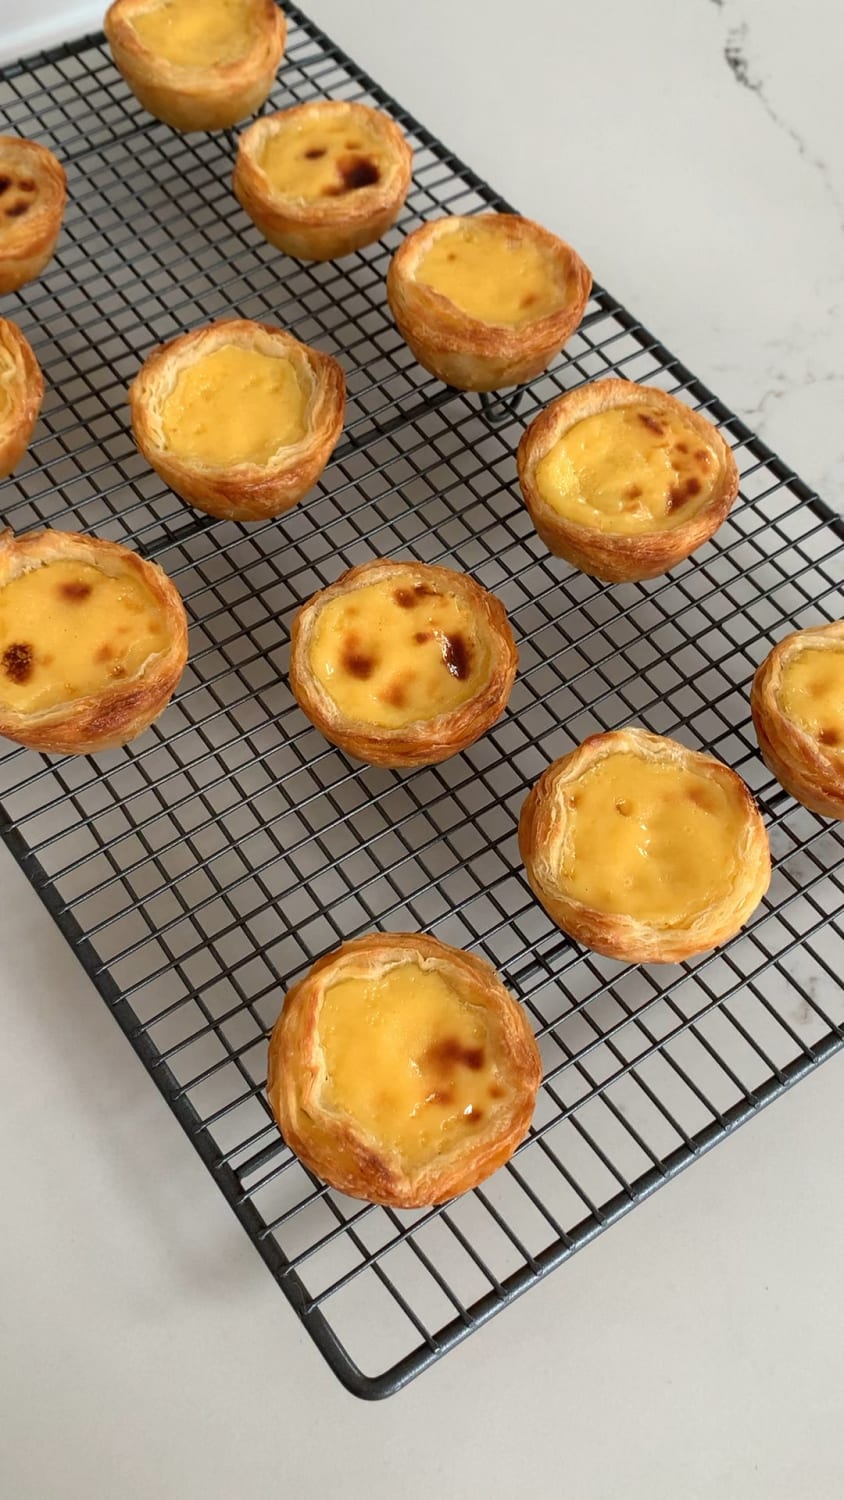 I made Portuguese egg tarts for the first time today after years being too intimidated by lamination. I’m so pleased with the result! SOUND ON!